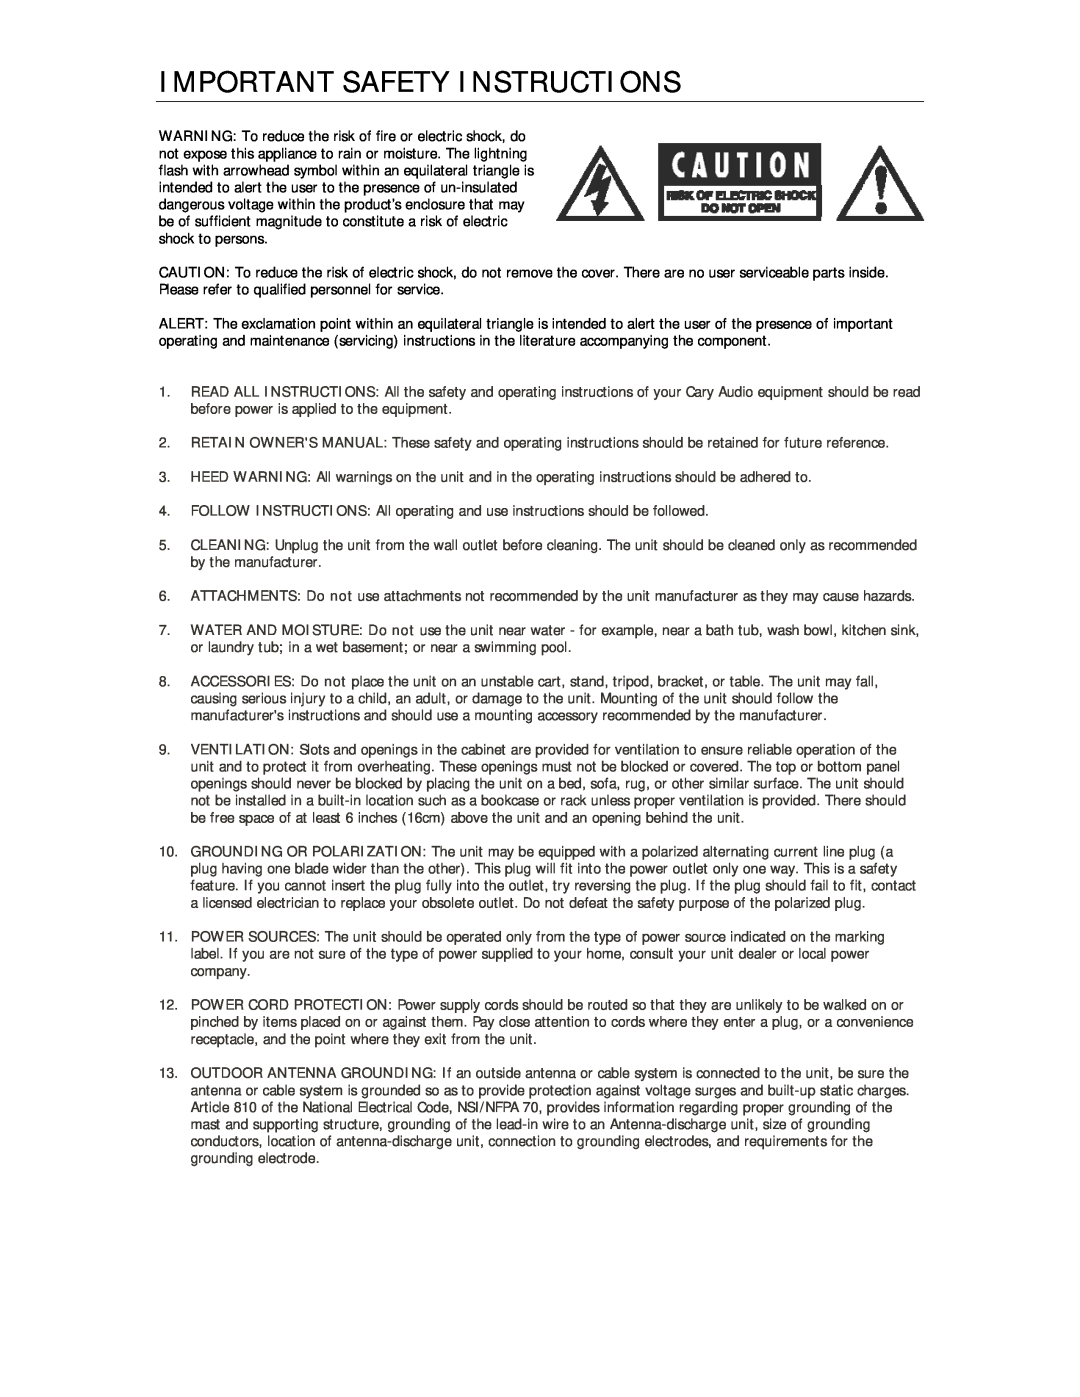 Cary Audio Design A 306 owner manual Important Safety Instructions 